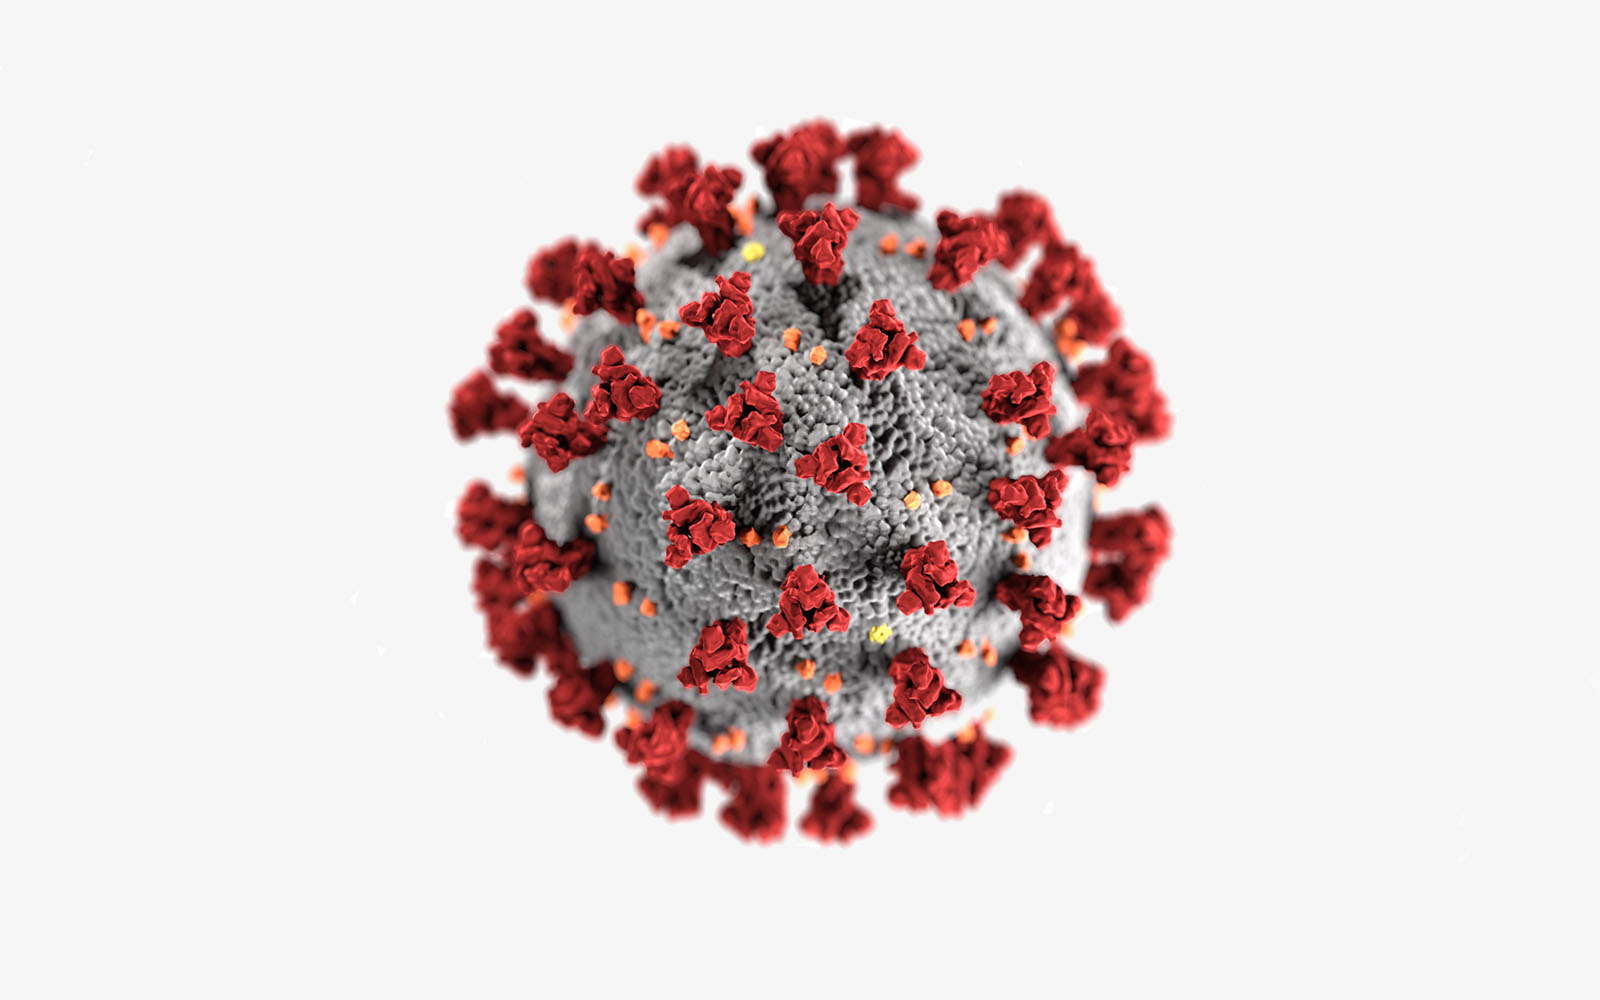 A detailed image of the Corona virus. Its a grey sphere with red triangular things coming out of it and yellow specks on it.